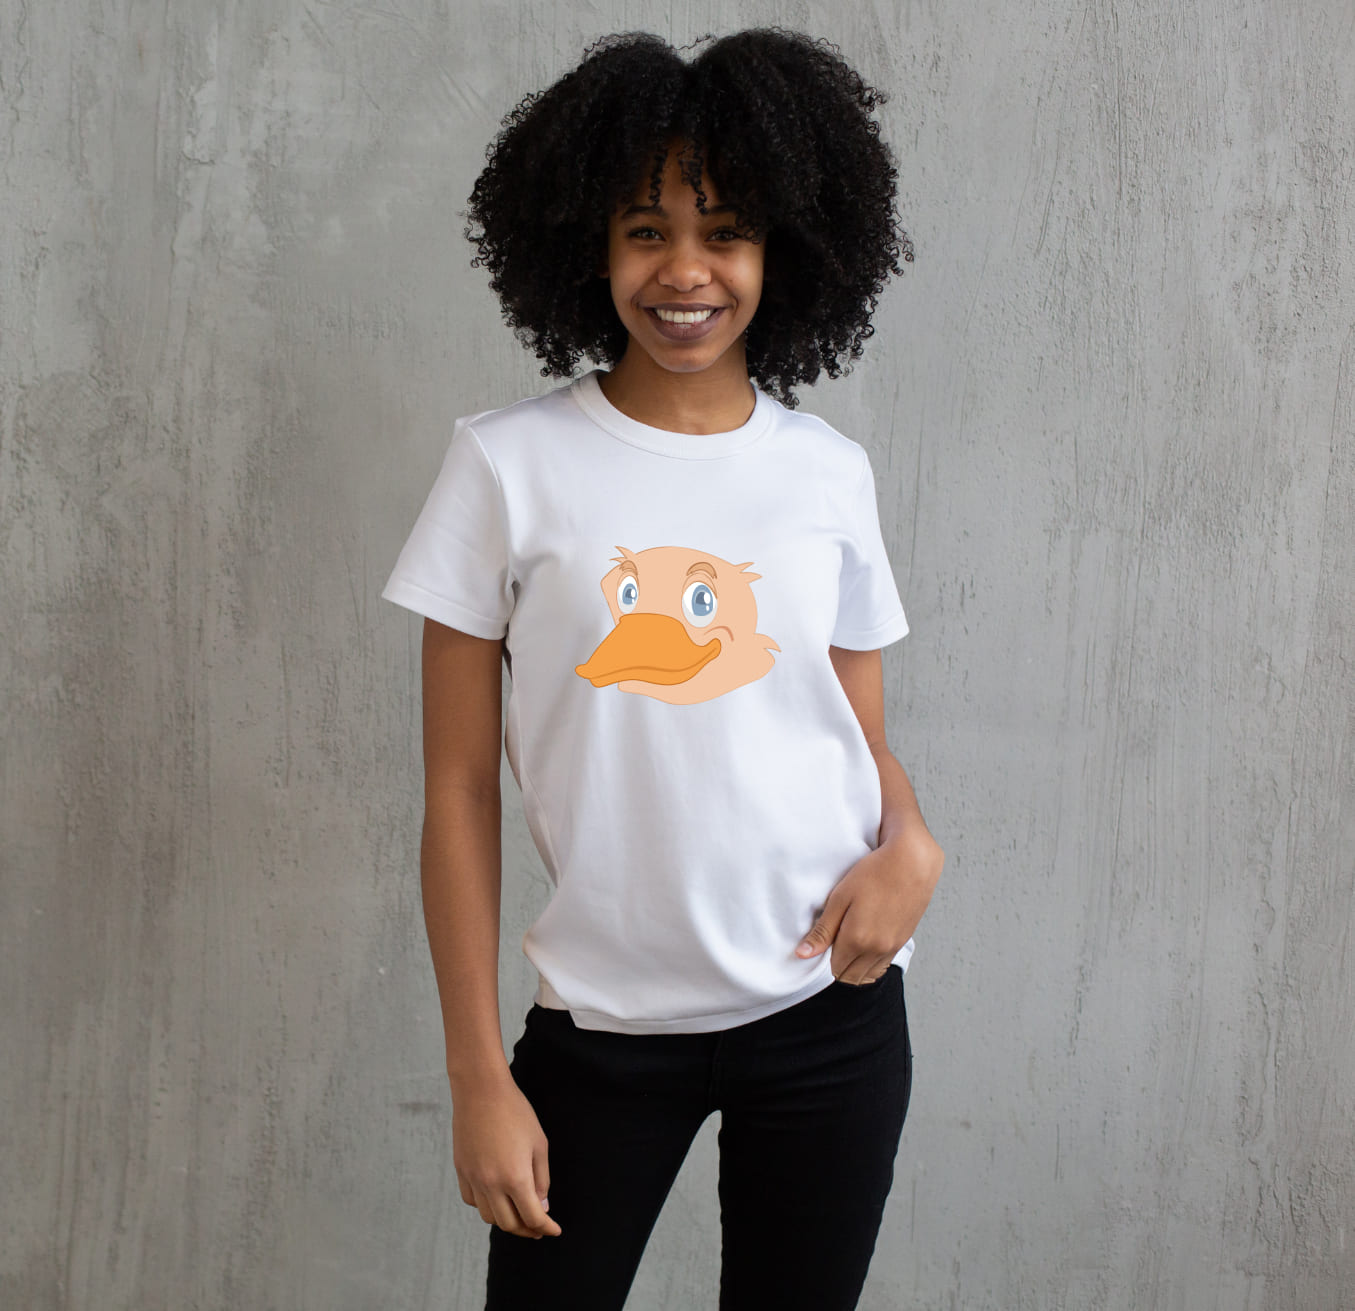 Image of a white t-shirt with amazing duck head print.